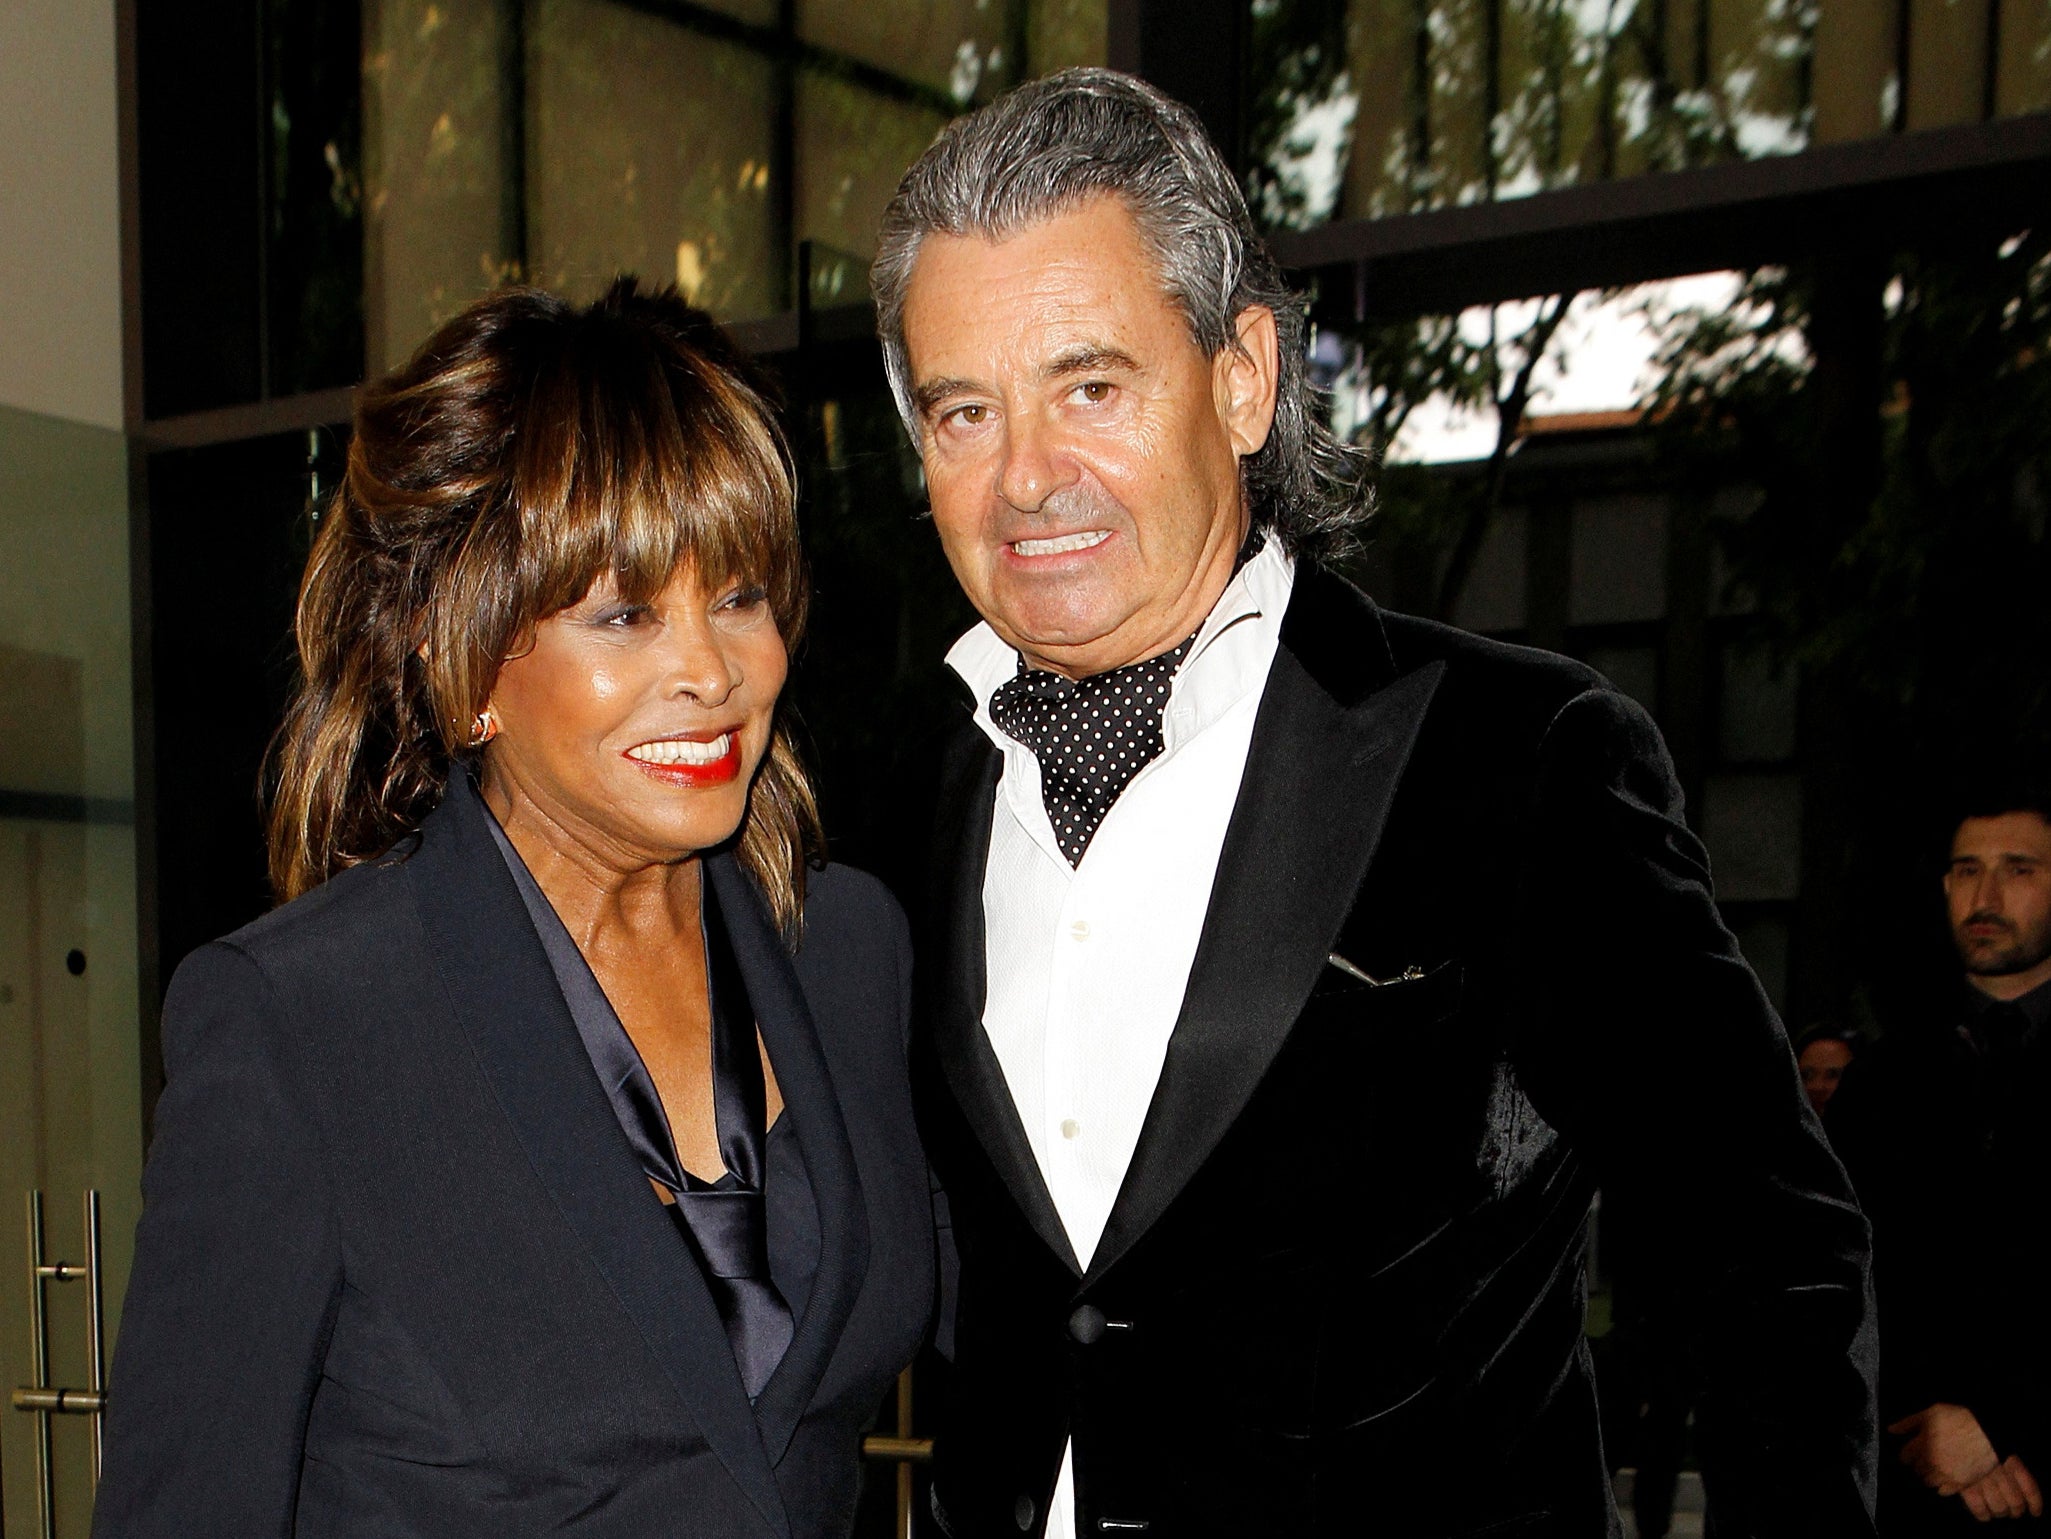 Tina Turner poses with her husband Erwin Bach before Giorgio Armani’s fashion show to celebrate 40th anniversary of his career and to mark the opening of the Expo 2015 in Milan, Italy, 30 April, 2015